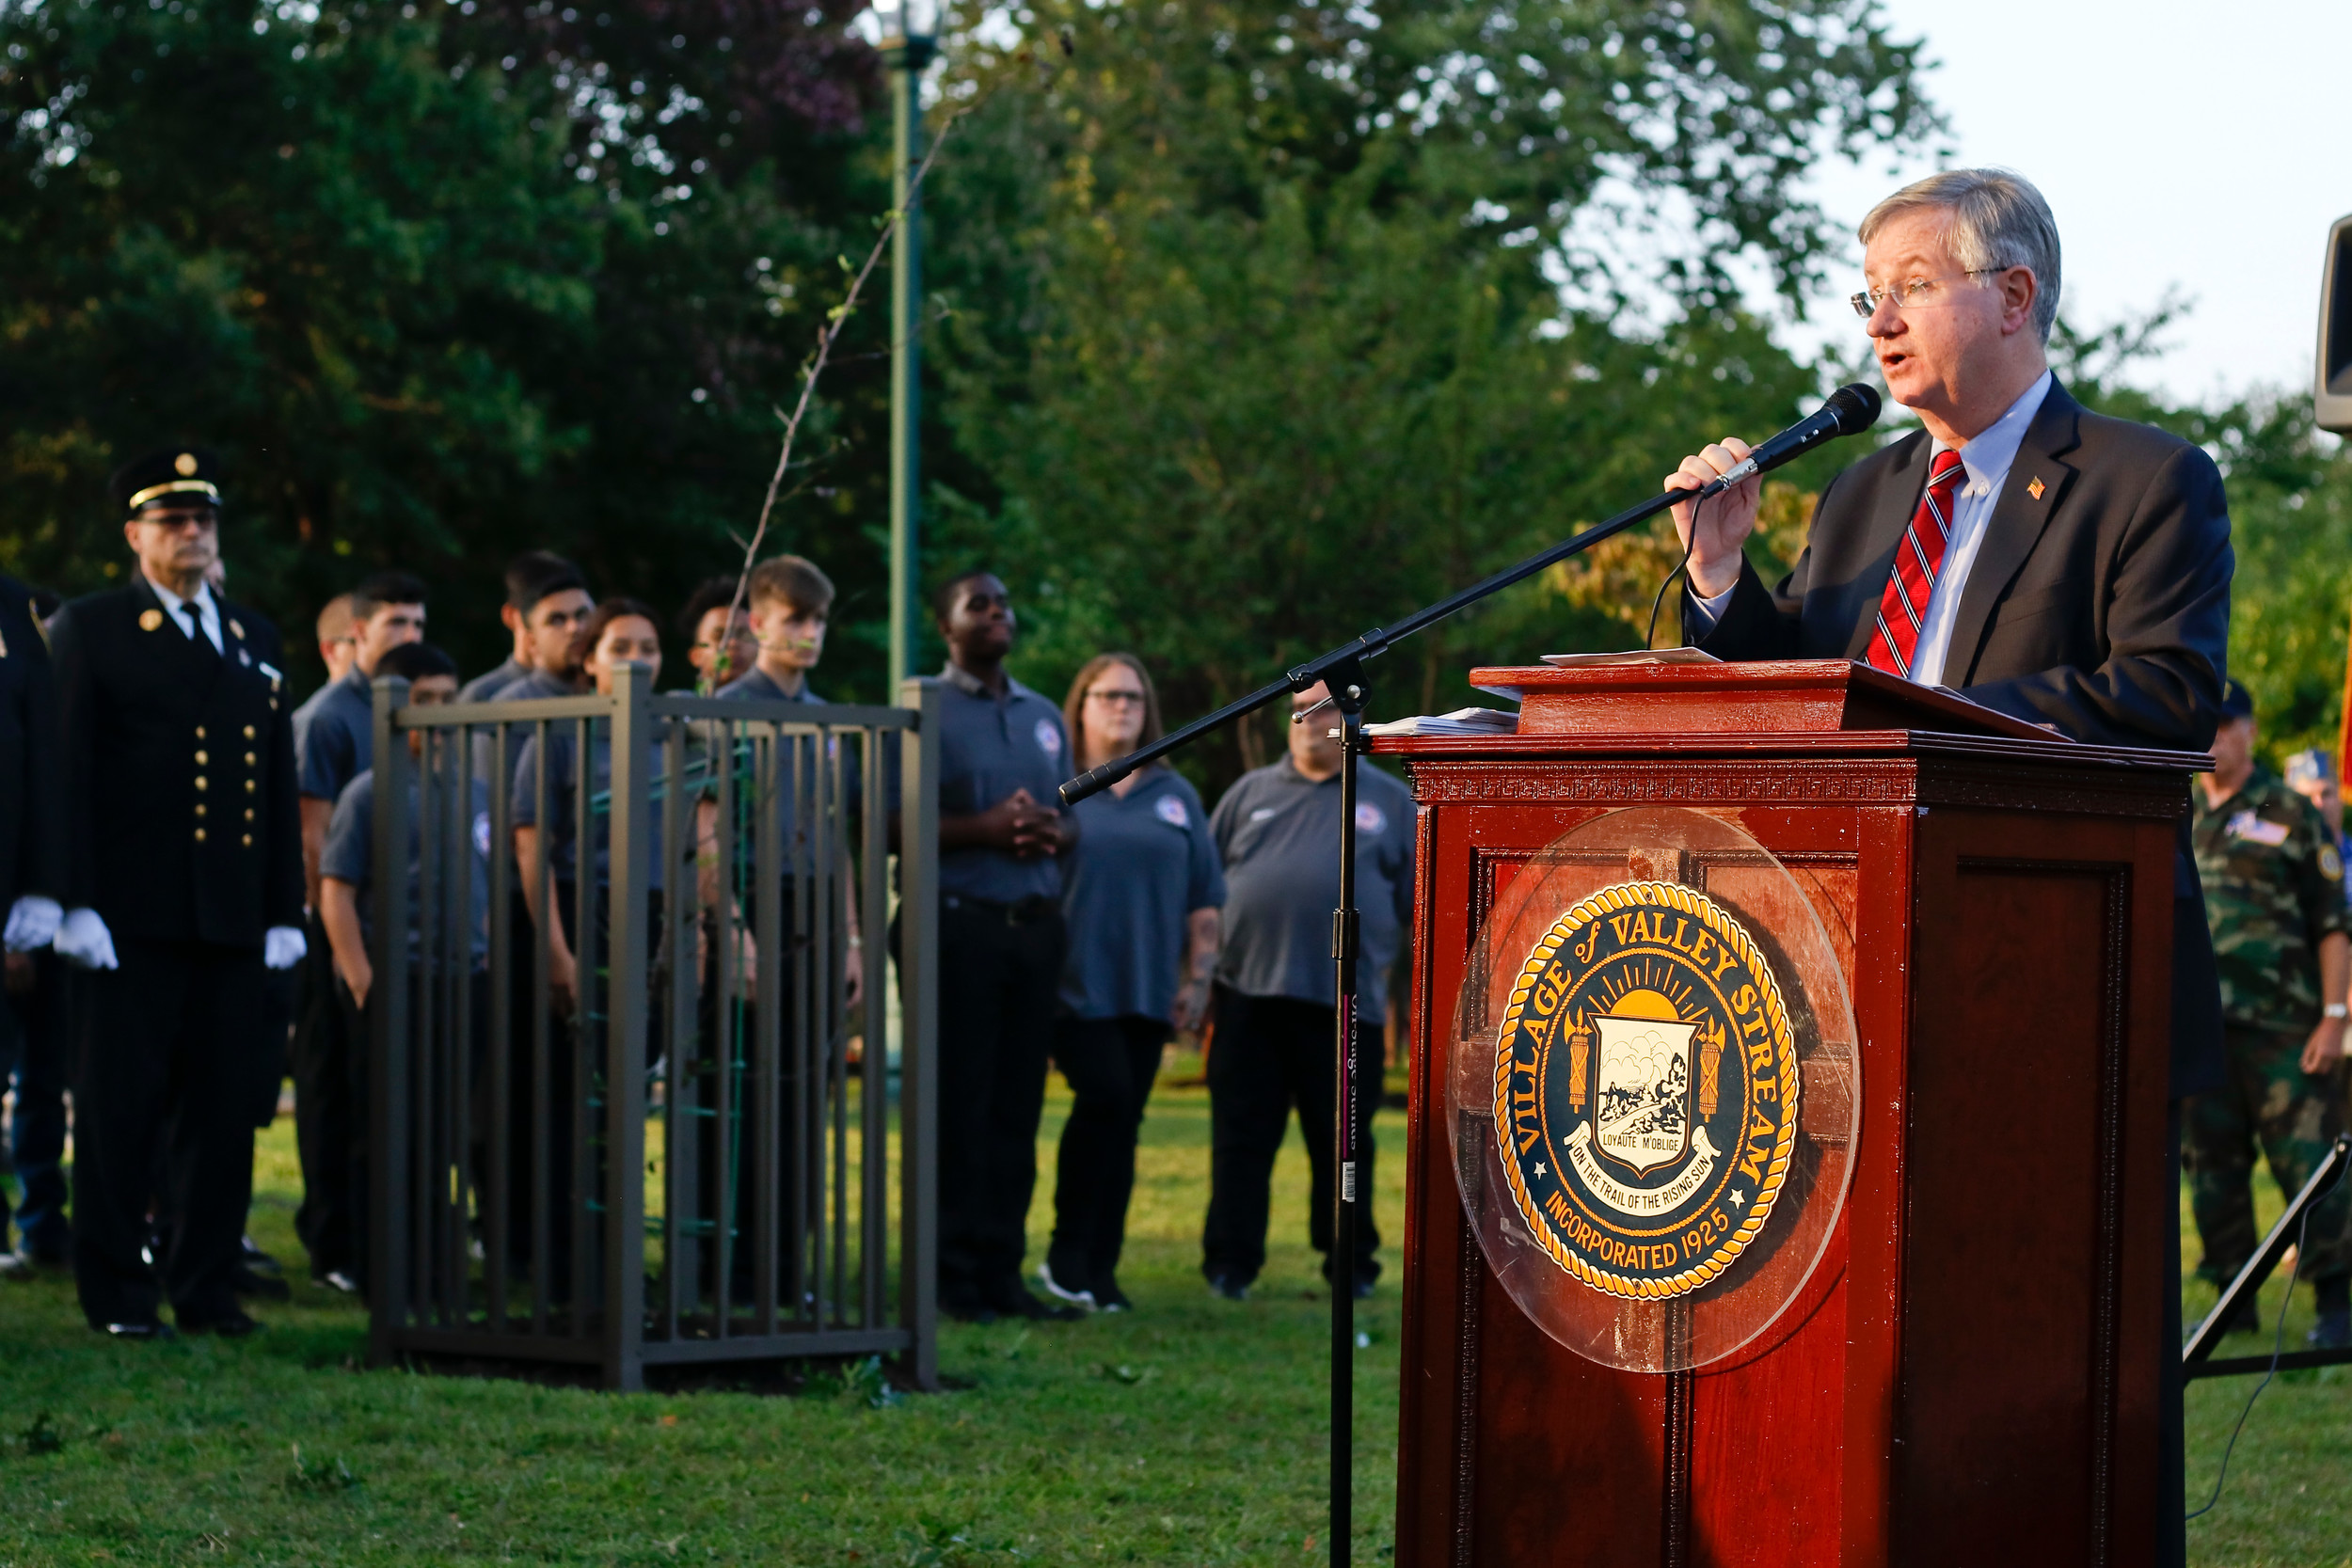 Master of Ceremonies, Jude Robert Bogle, addressed the gathered crowd of residents, fire fighters, veterans, boy scouts, girl scouts and local politicians who gathered for this years September 11 remembrance ceremony.